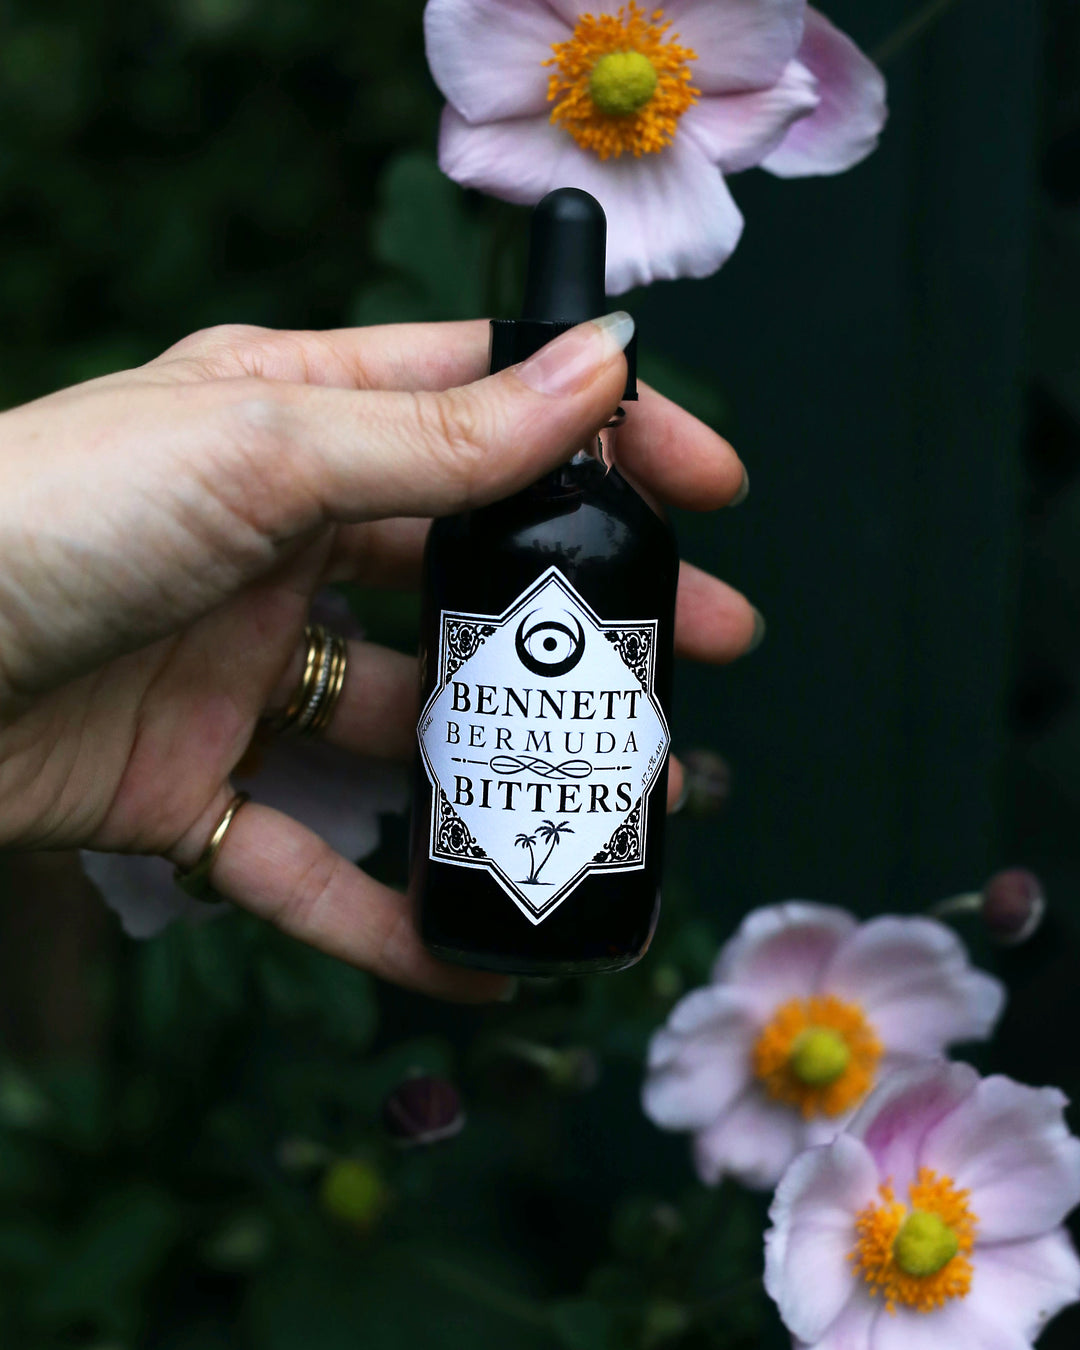 Hand holding a bottle of Tropical Bermuda Bitters by Bennett Bitters in front of pink flowers.